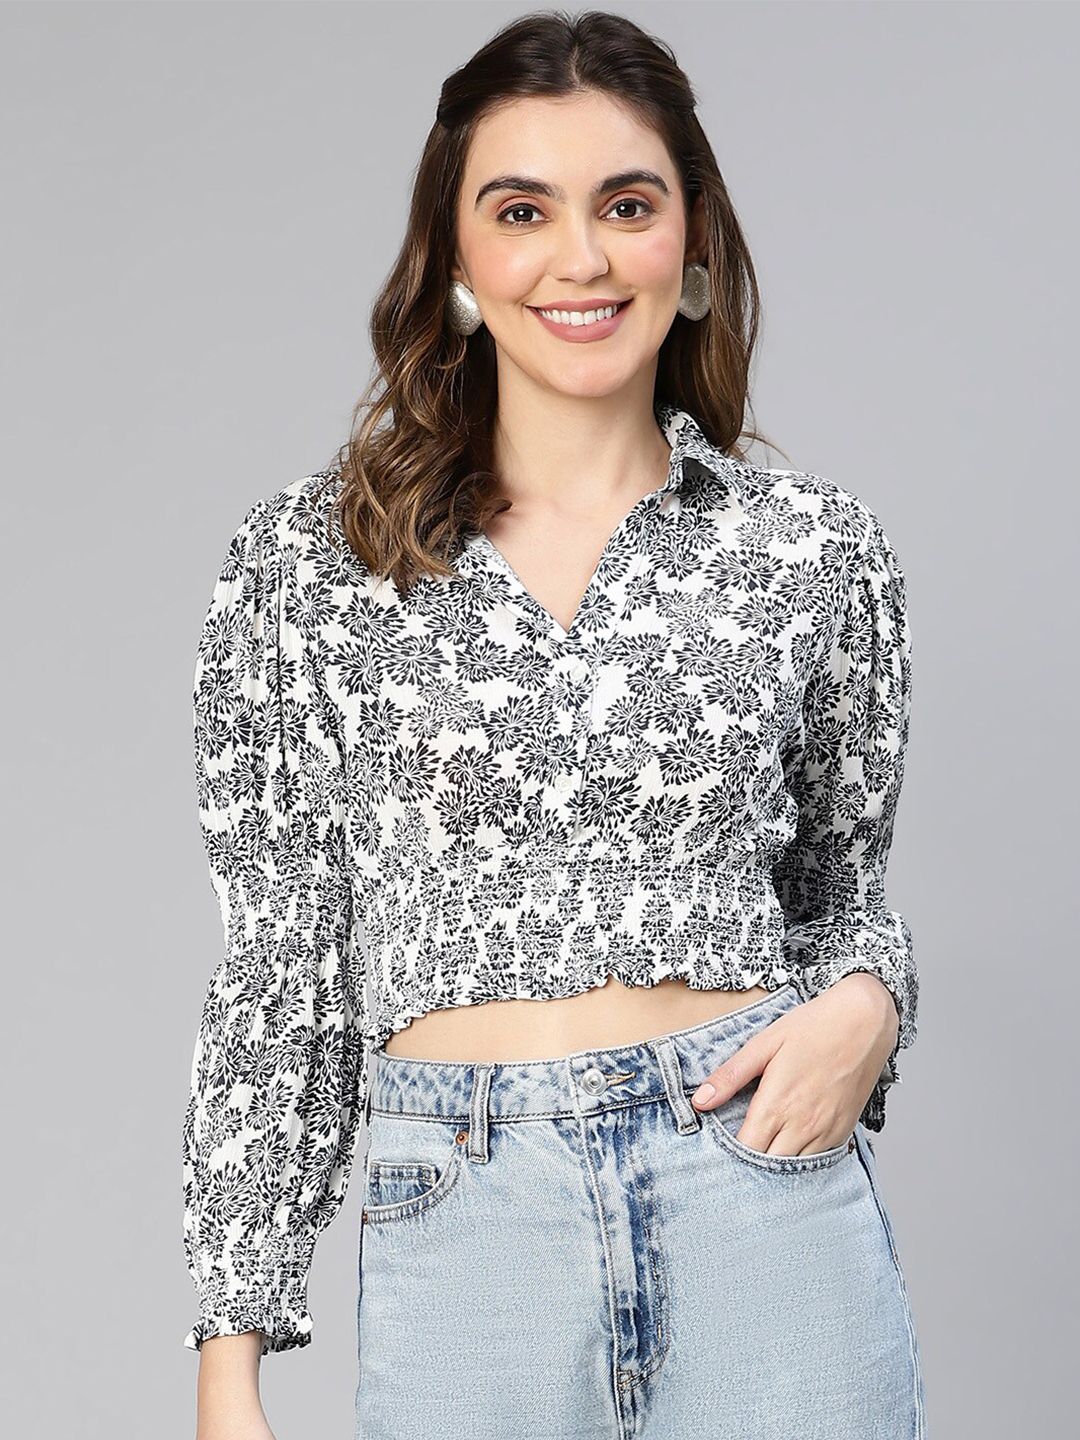 Oxolloxo Floral Print Smocked Blouson Crop Top Price in India